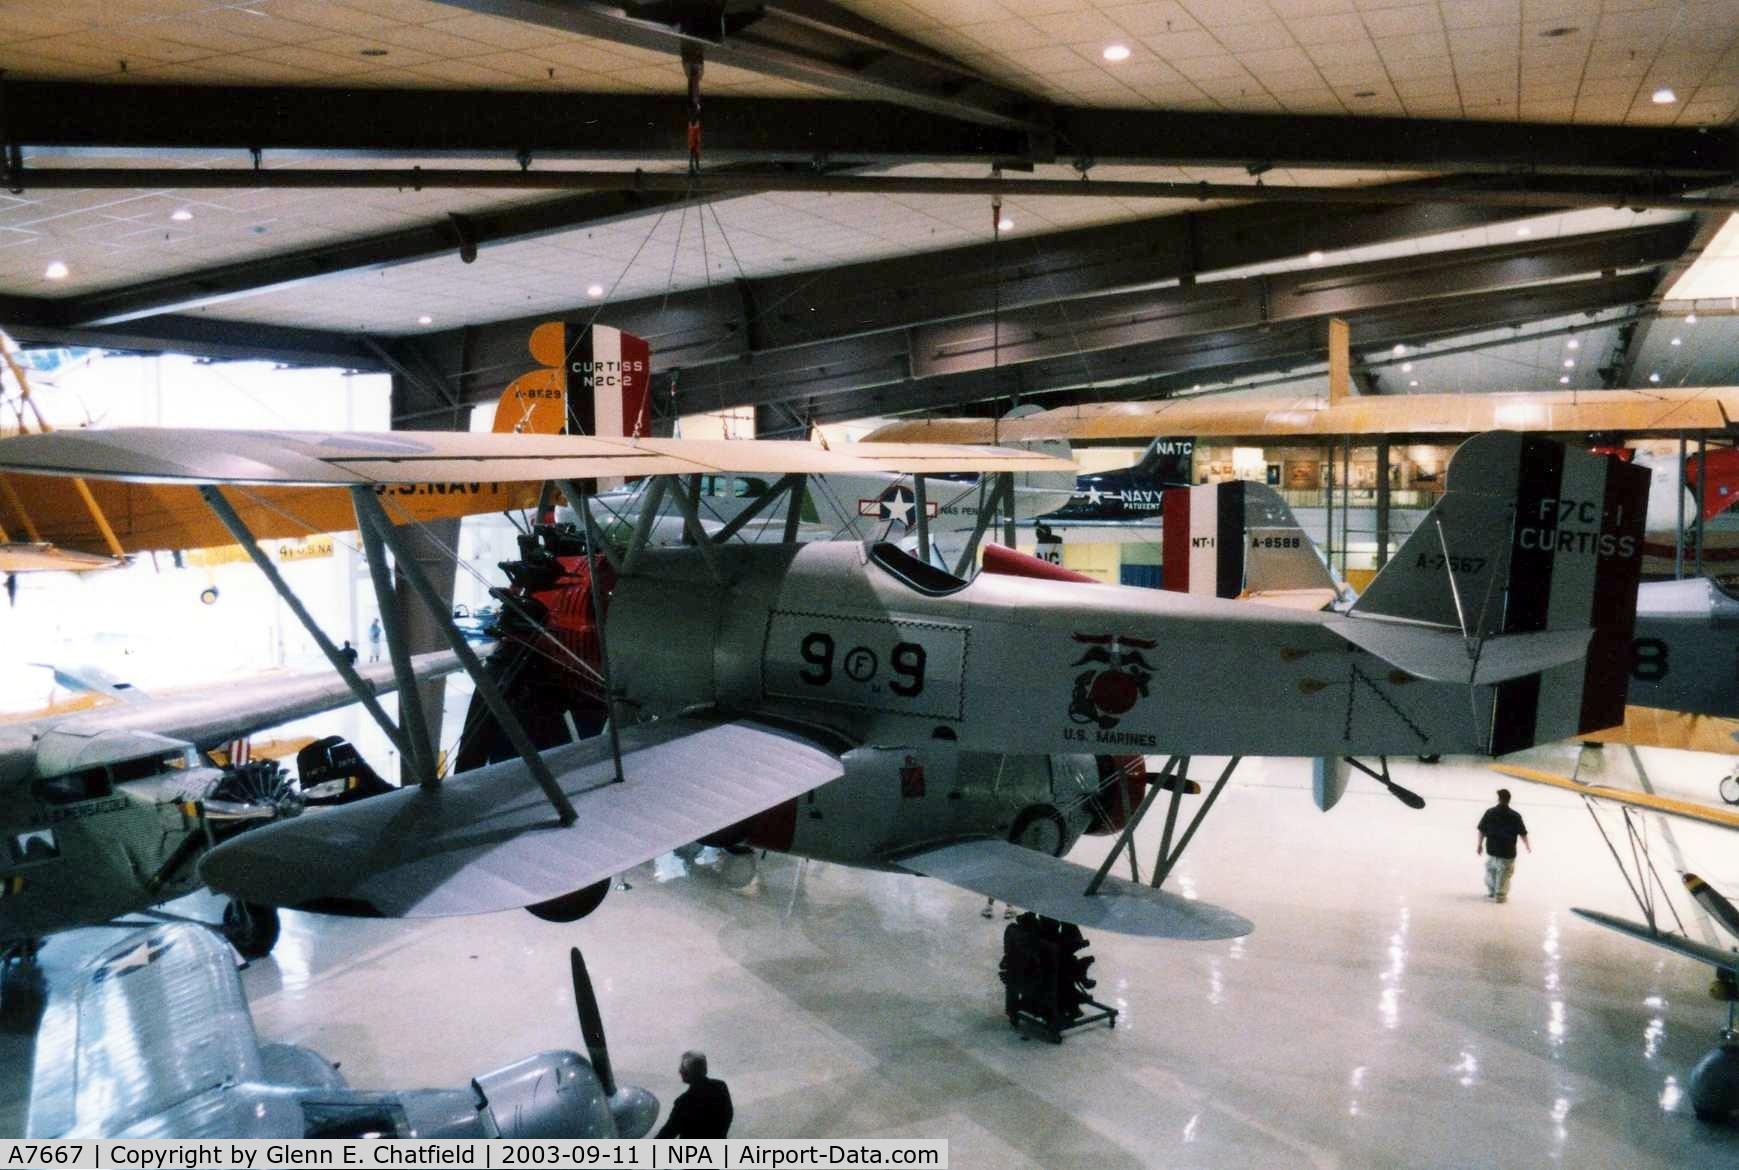 A7667, 1928 Curtiss F7C-1 C/N Not found A-7667, F7C-1 at the National Museum of Naval Aviation